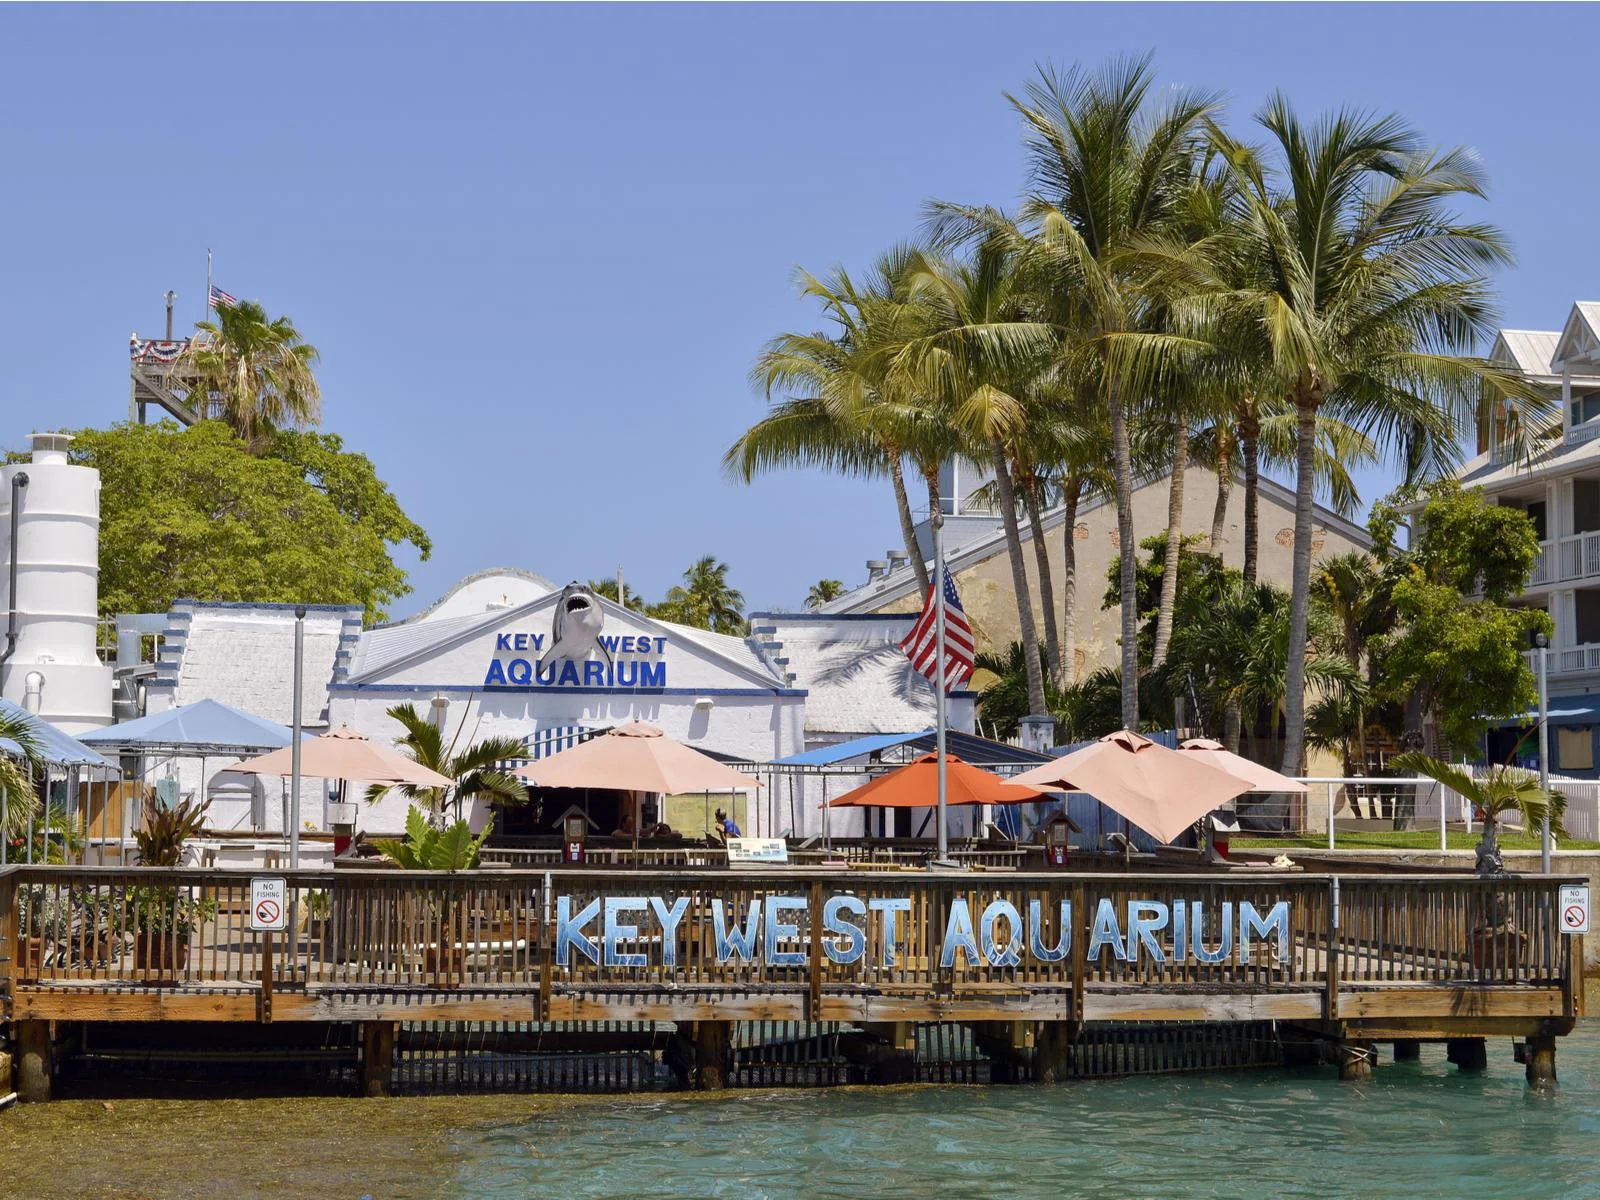 One of the oldest and the best aquariums in Florida, Key West Aquarium with its signage on a boardwalk and shark figure above the entrance